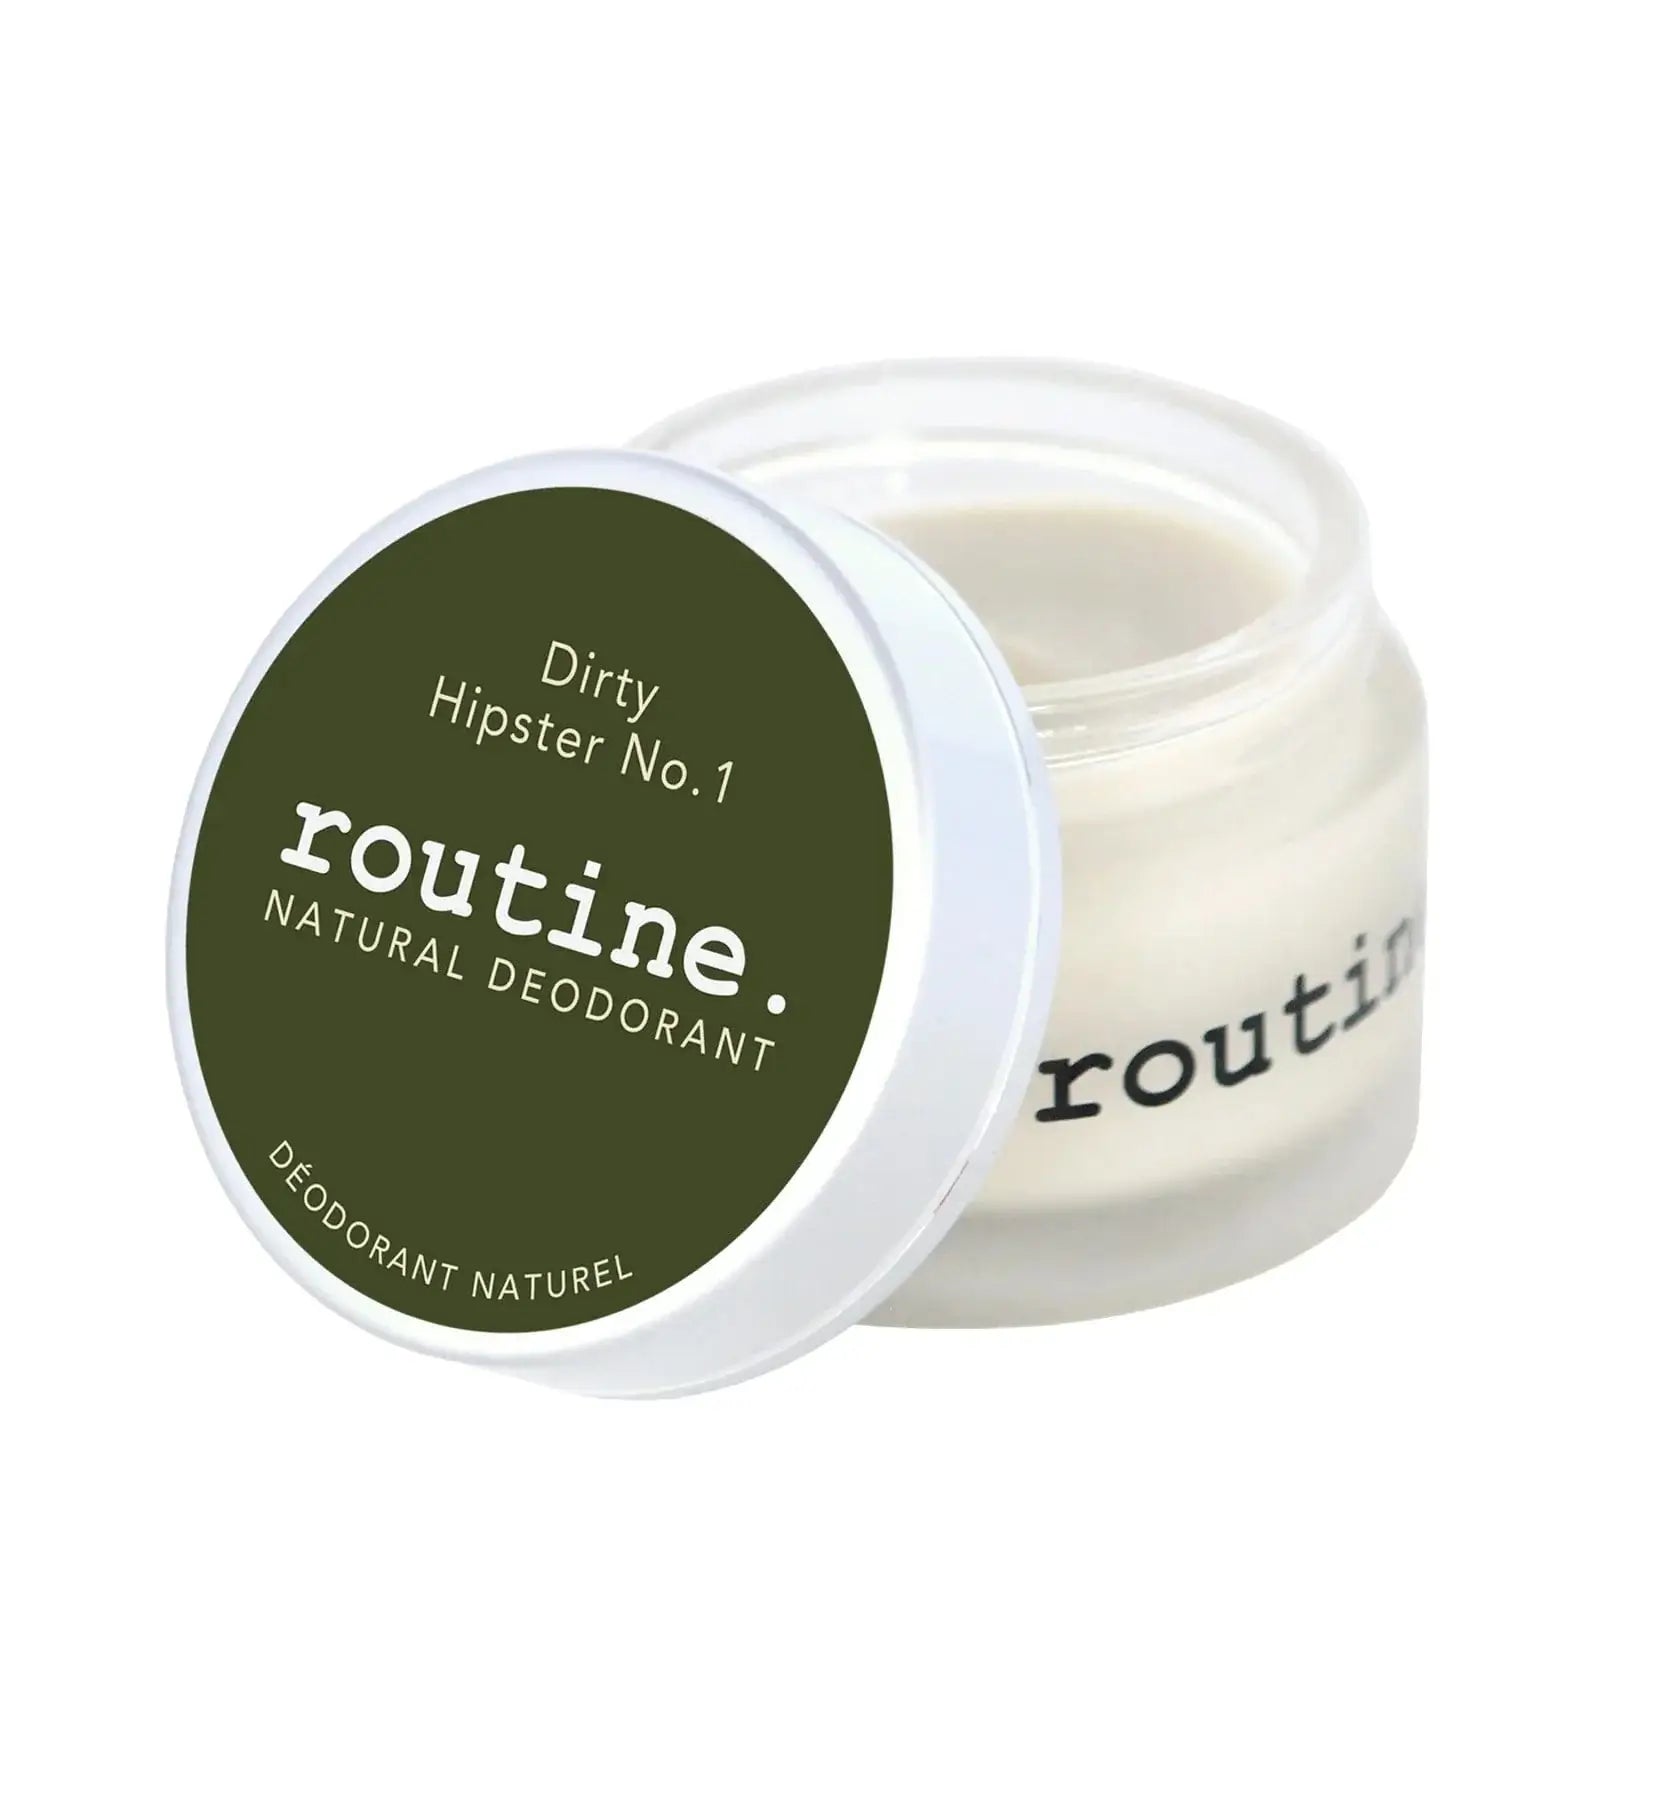 Routine Deodorant Copy of Routine, Dirty Hipster, Deodorant Jar, made in Calgary